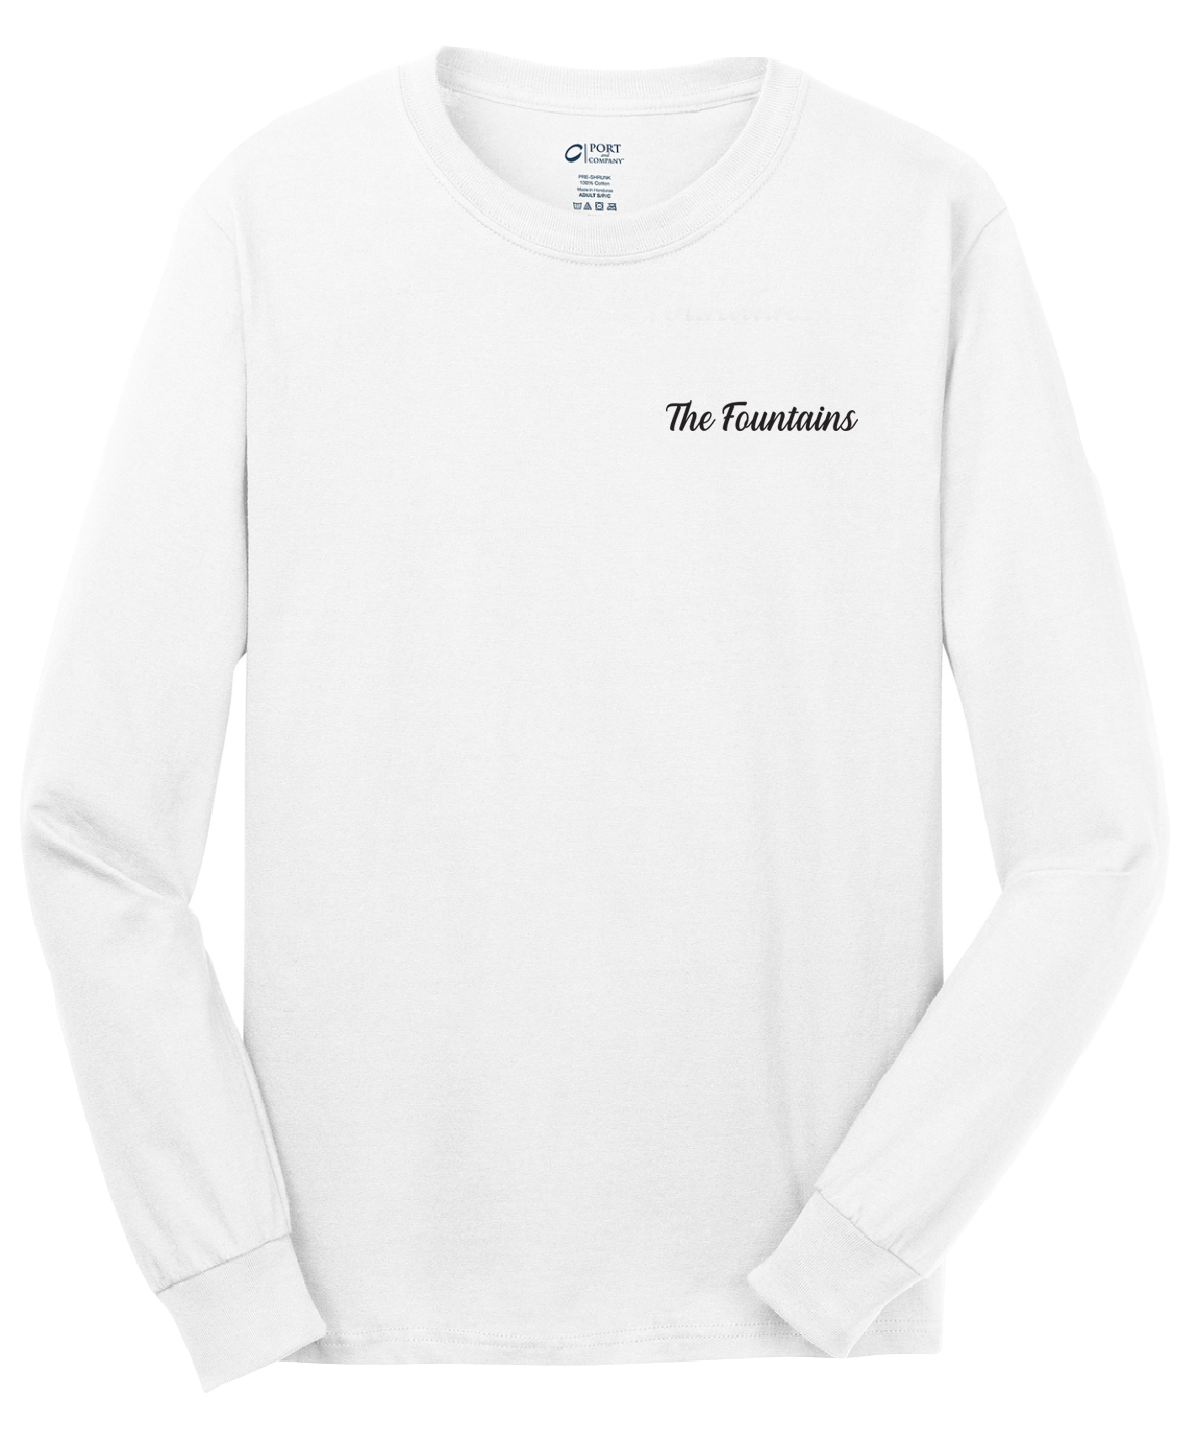 The Fountains - Mens - Port & Company® - Long Sleeve Core Cotton Tee